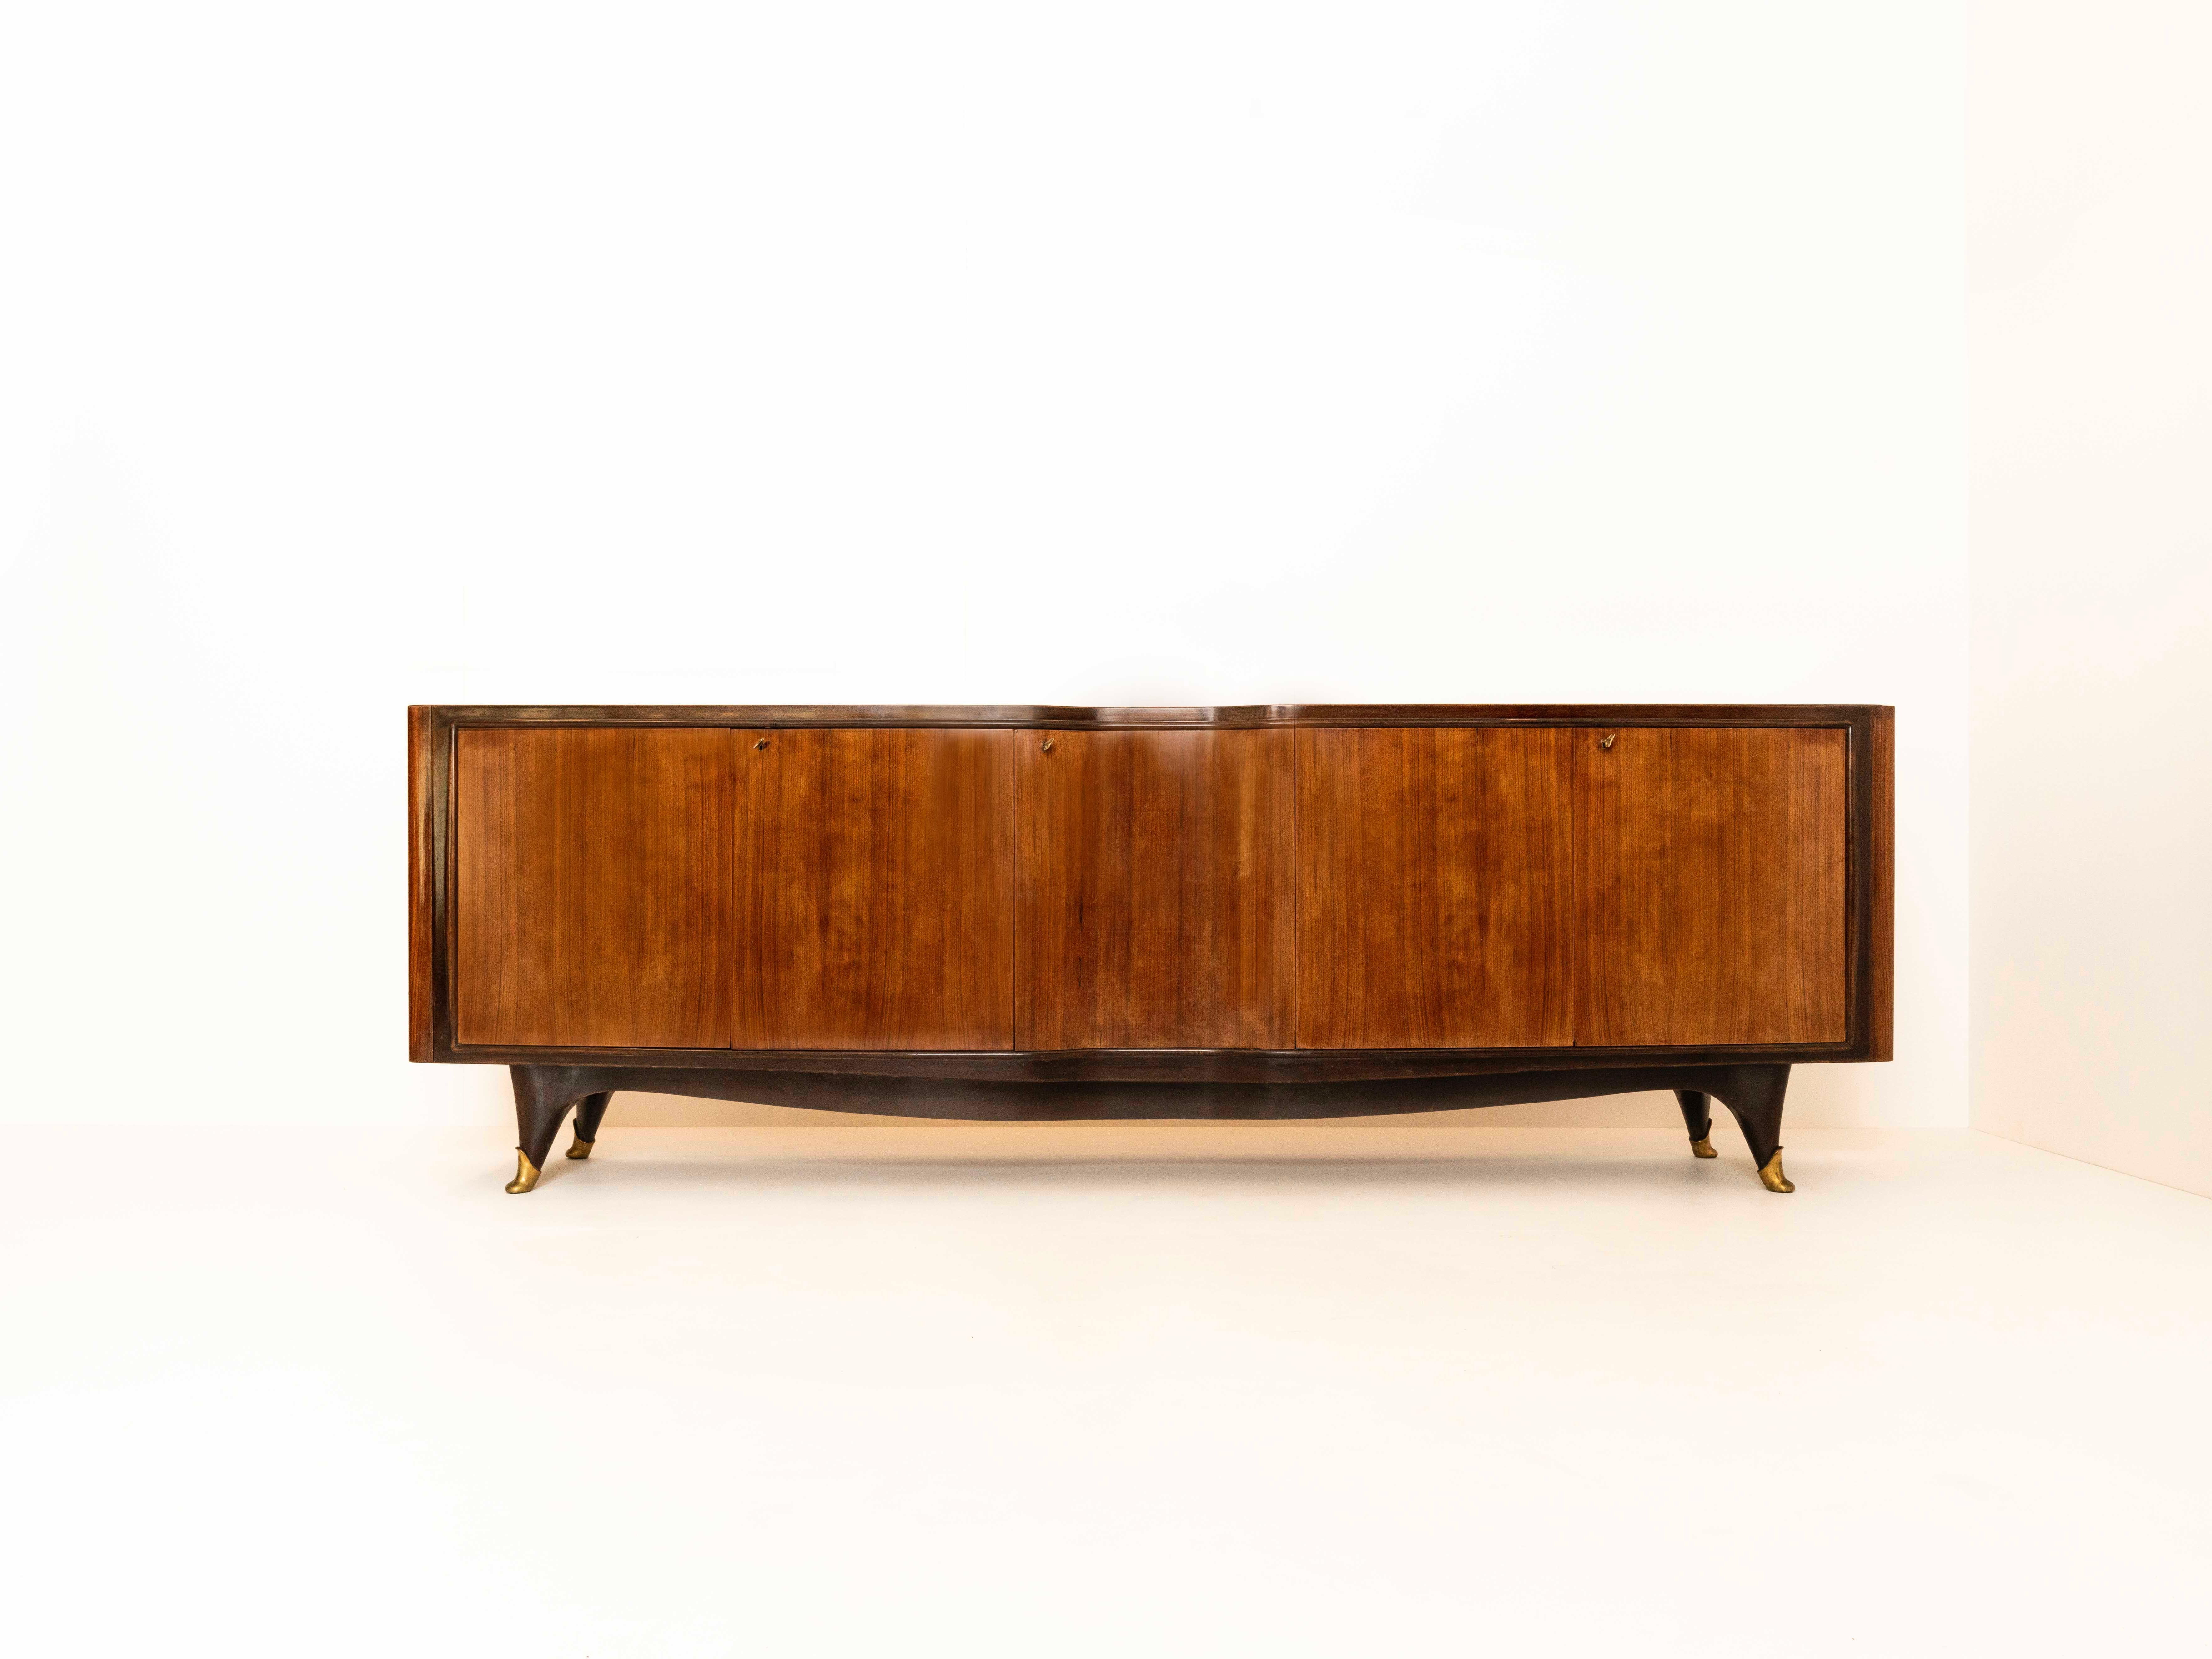 Large Vittorio Dassi Credenza in Wood, Glass and Brass from Italy, ca the 1950s. This is a true eye-catcher. It has five doors with shelves behind it and three original keys available. The top is made of glass with underneath an 'orange' color and